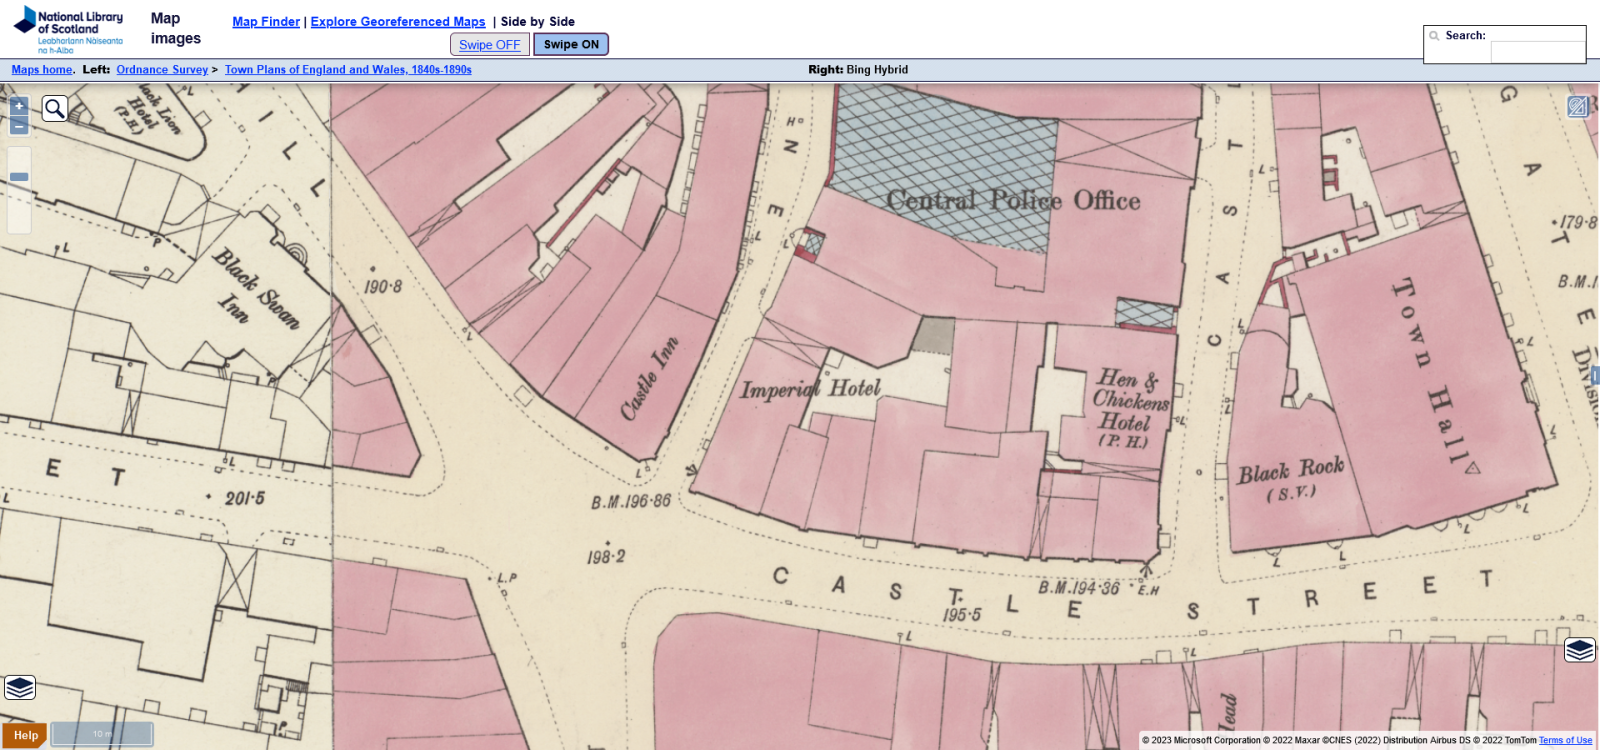 Screenshot 2023-02-12 at 19-57-58 Side by side georeferenced maps viewer with layer swipe - Map images - National Library of Scotland.png